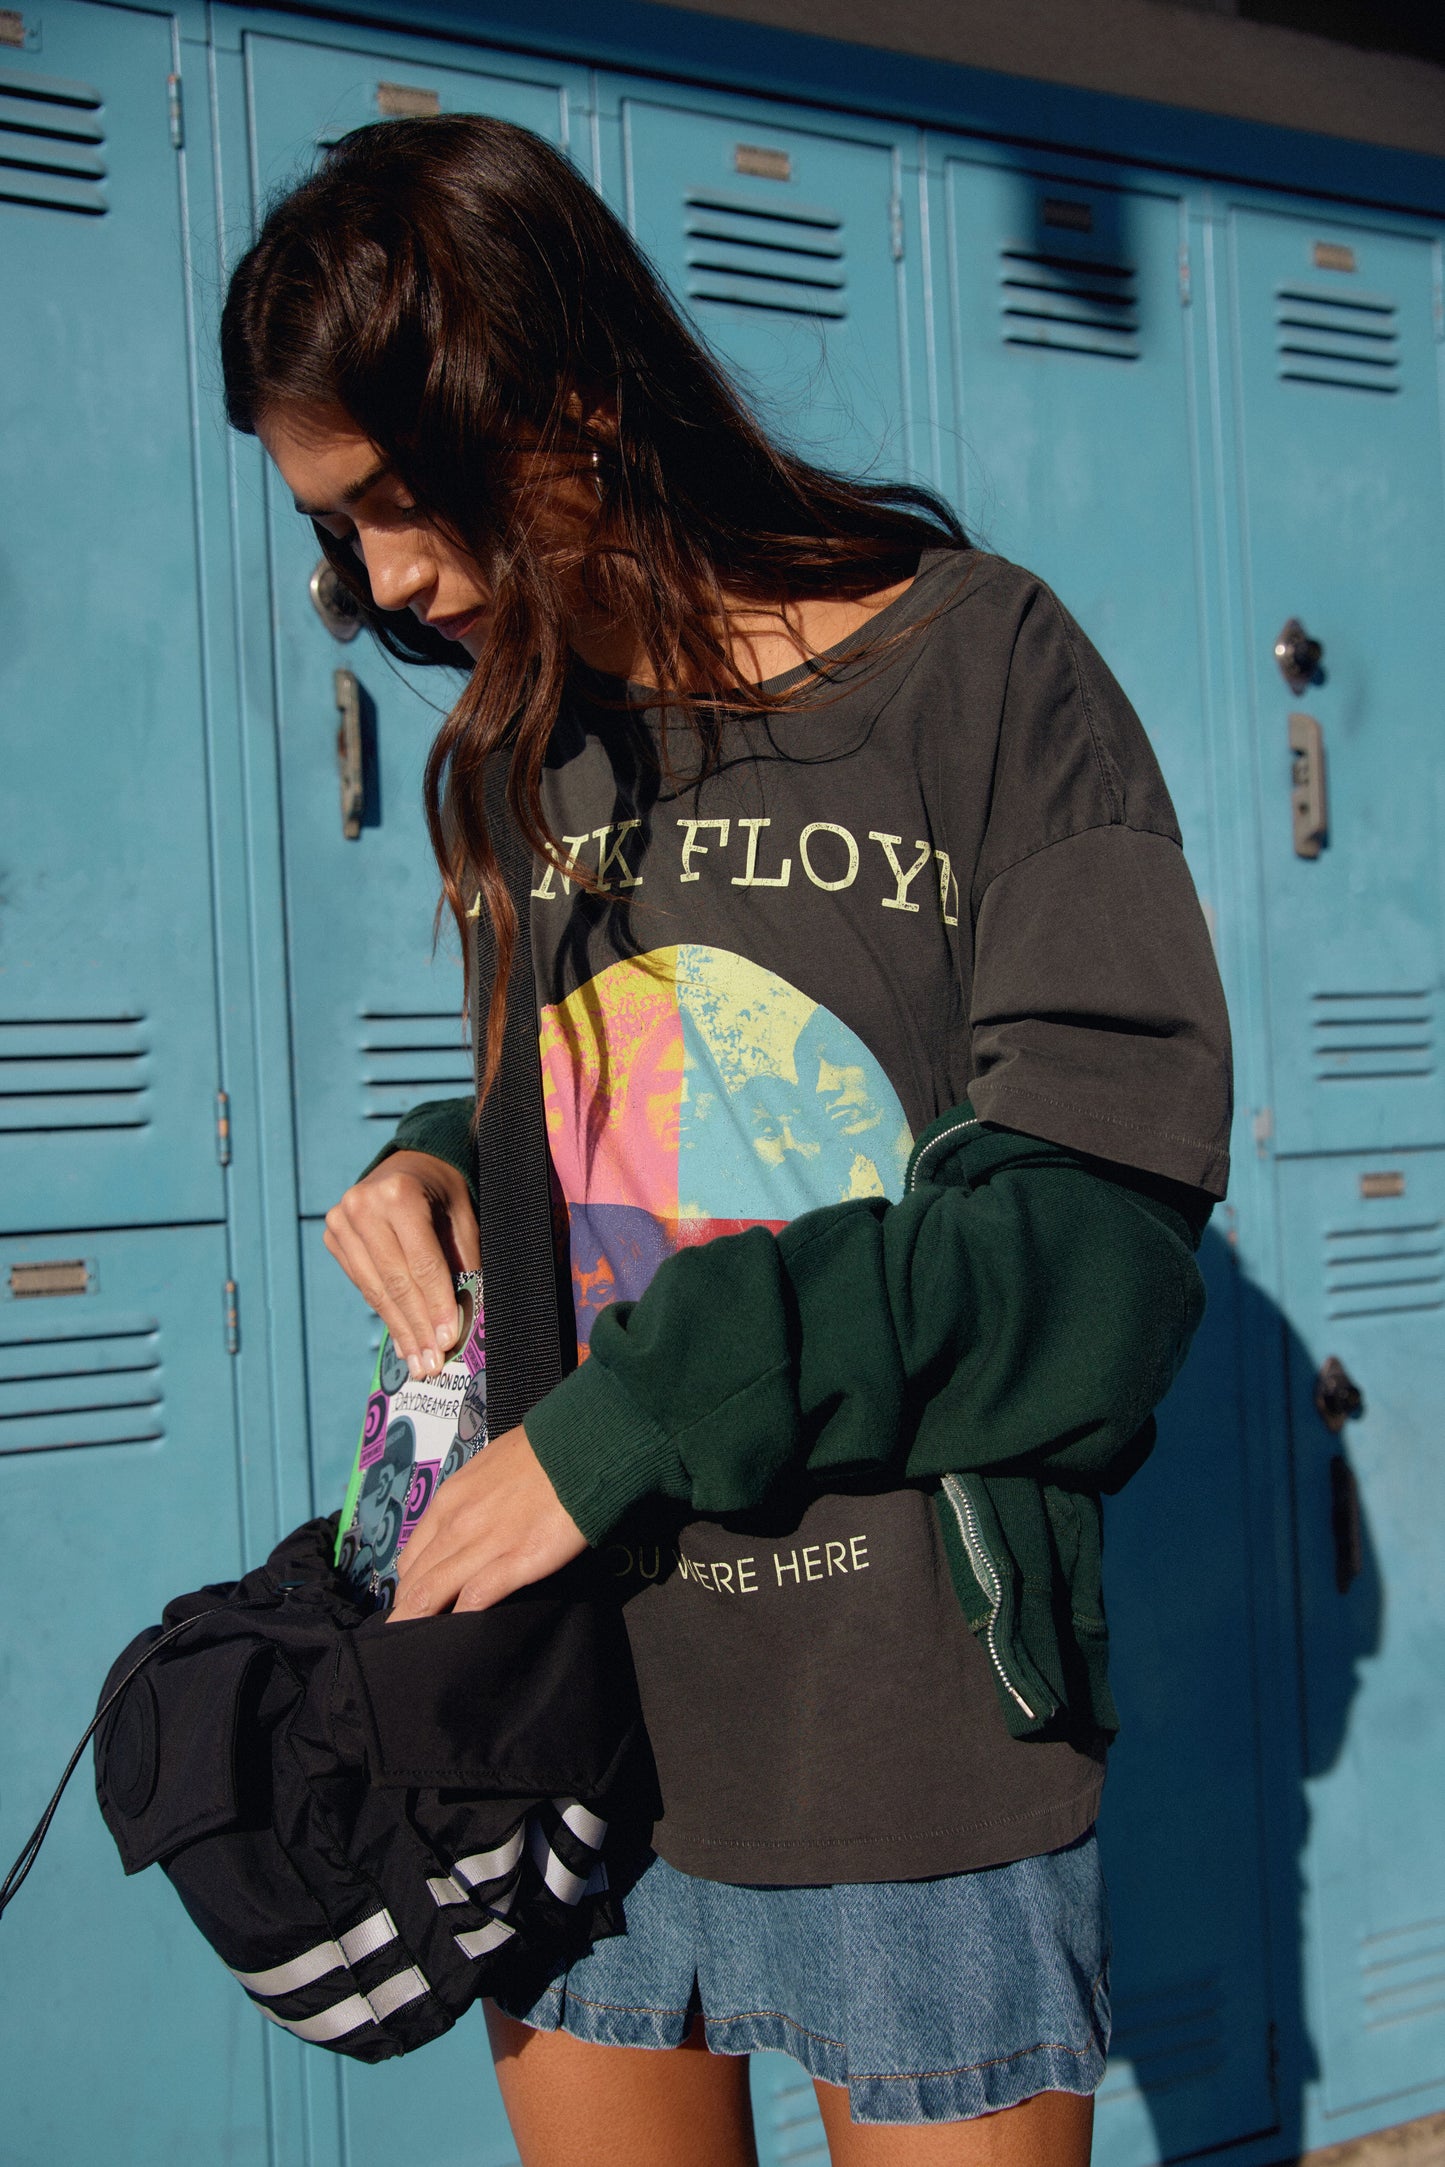 A model featuring a black tee stamped with "Pink Floyd" and a collage picture of the band.